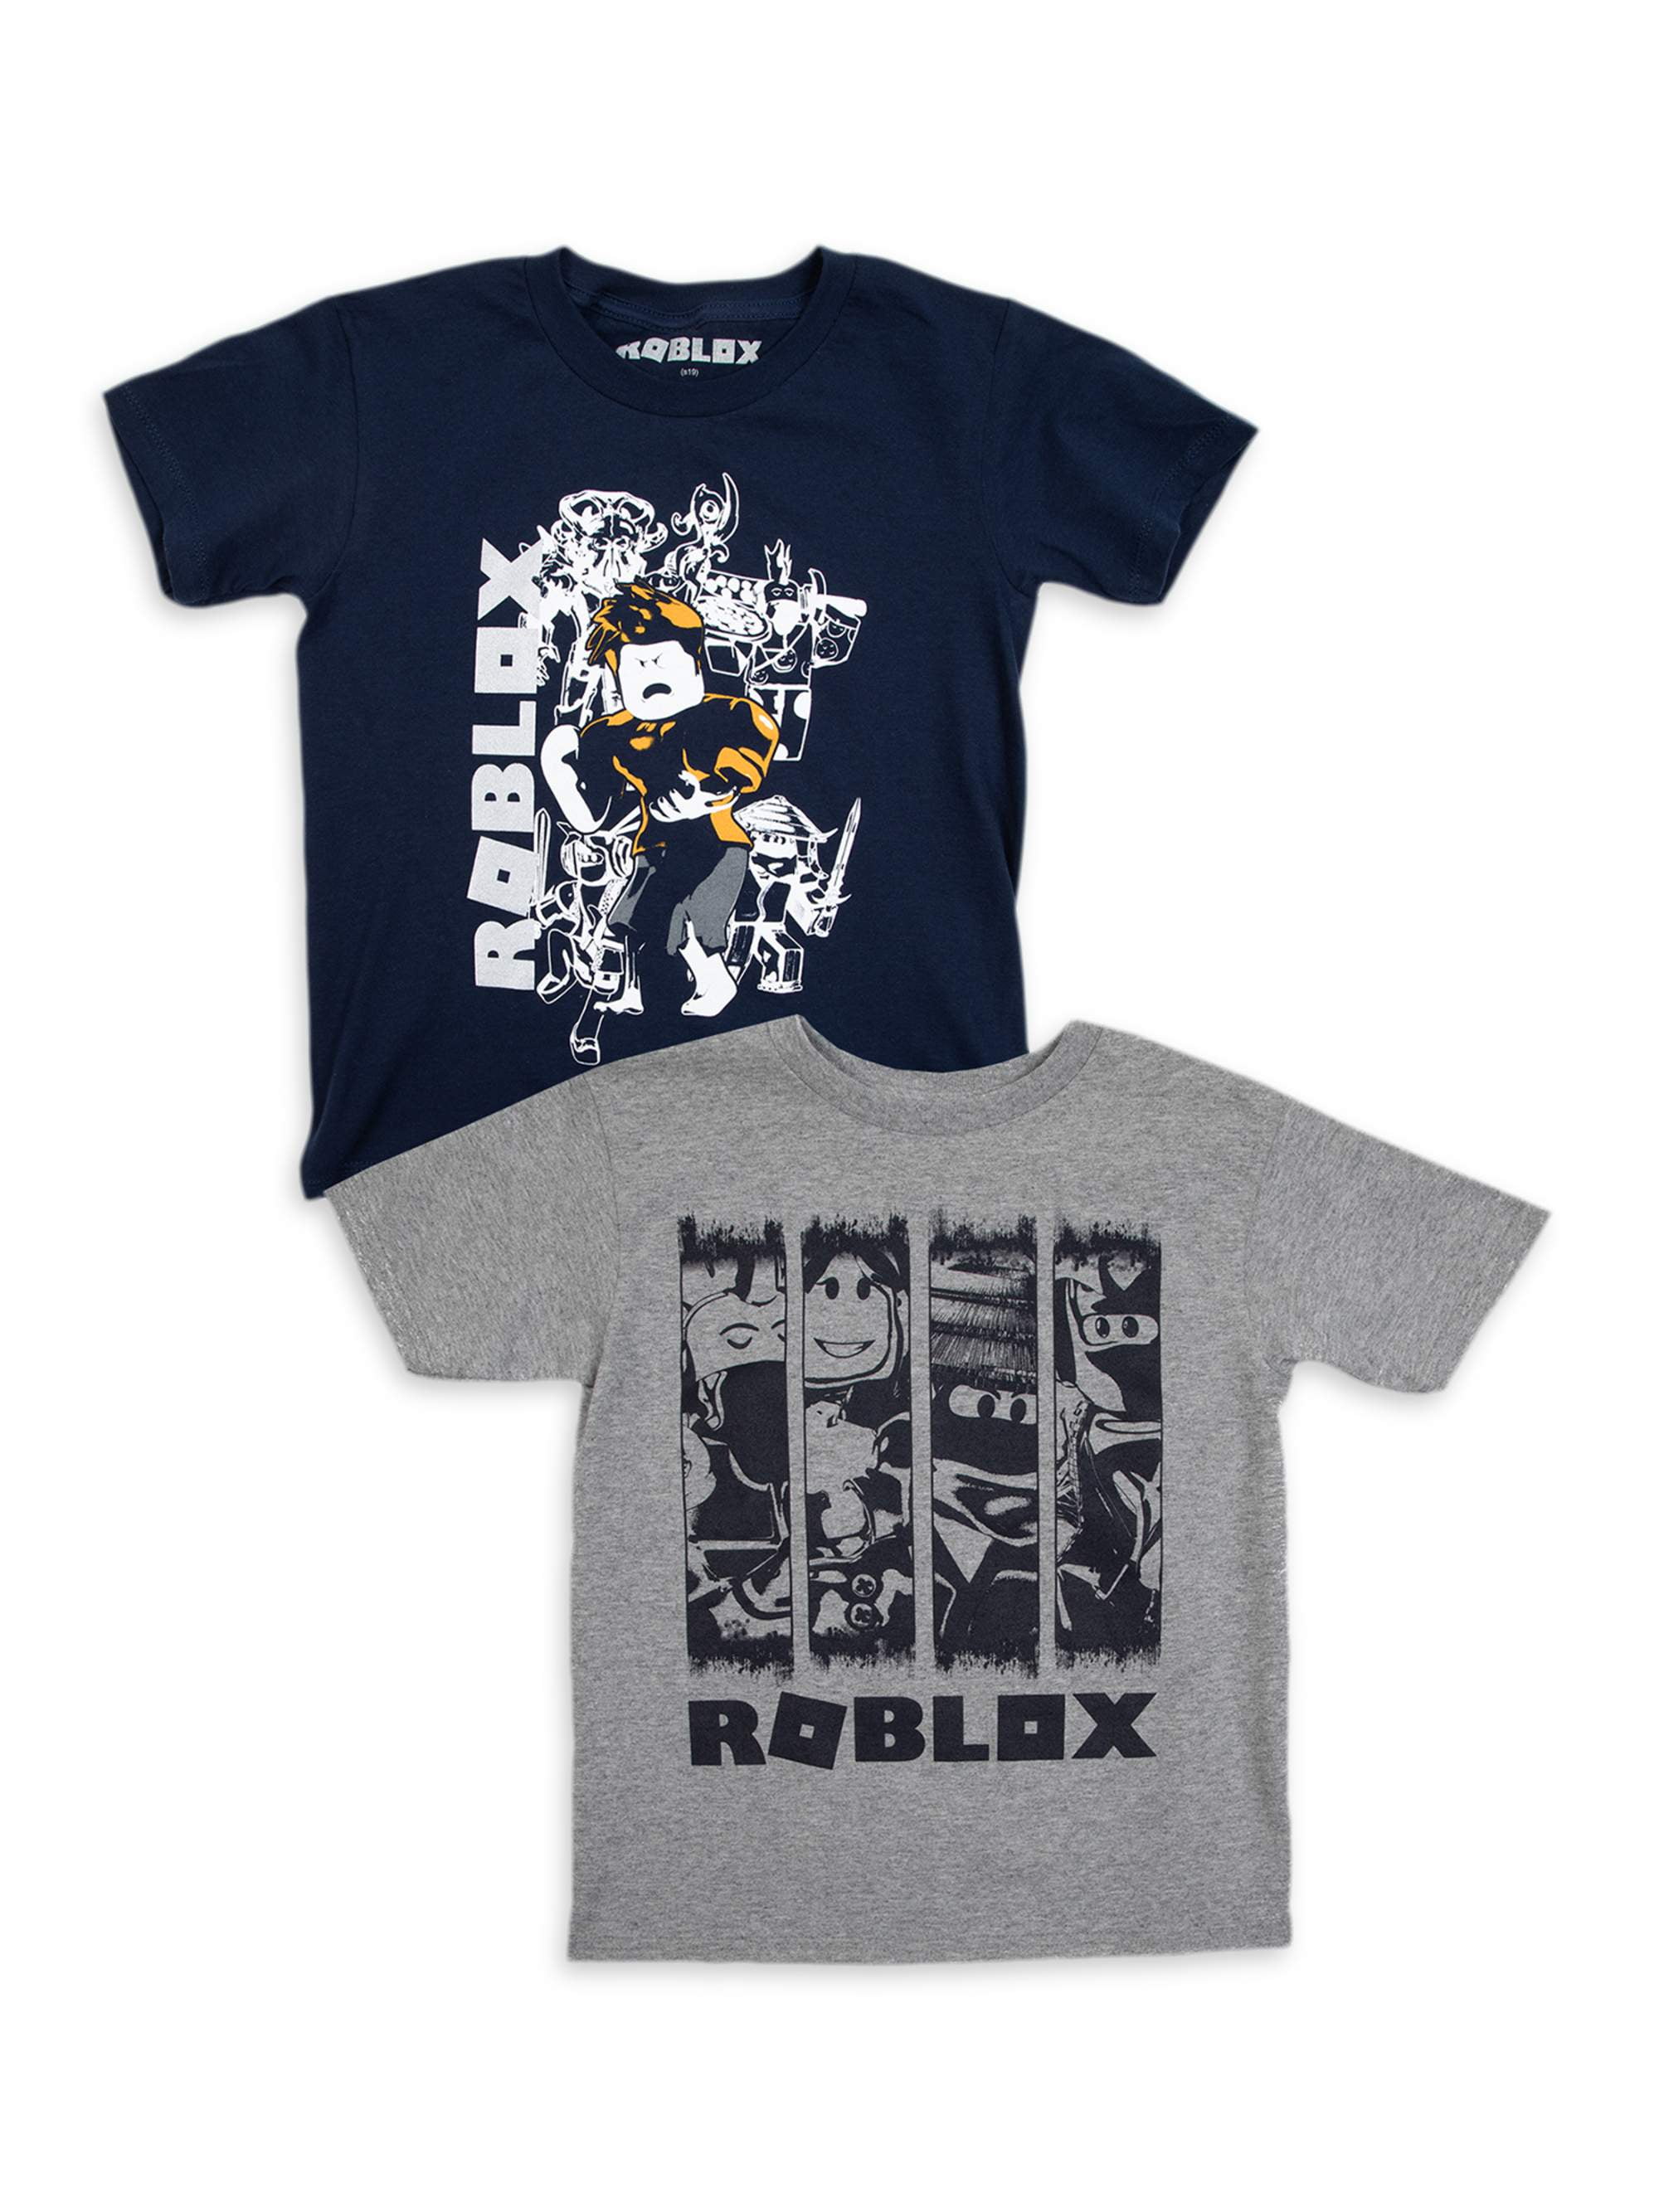 ROBLOX Unisex BLACK T Shirt Size SMALL USA, GOOD CONDITION, Gaming, Tech